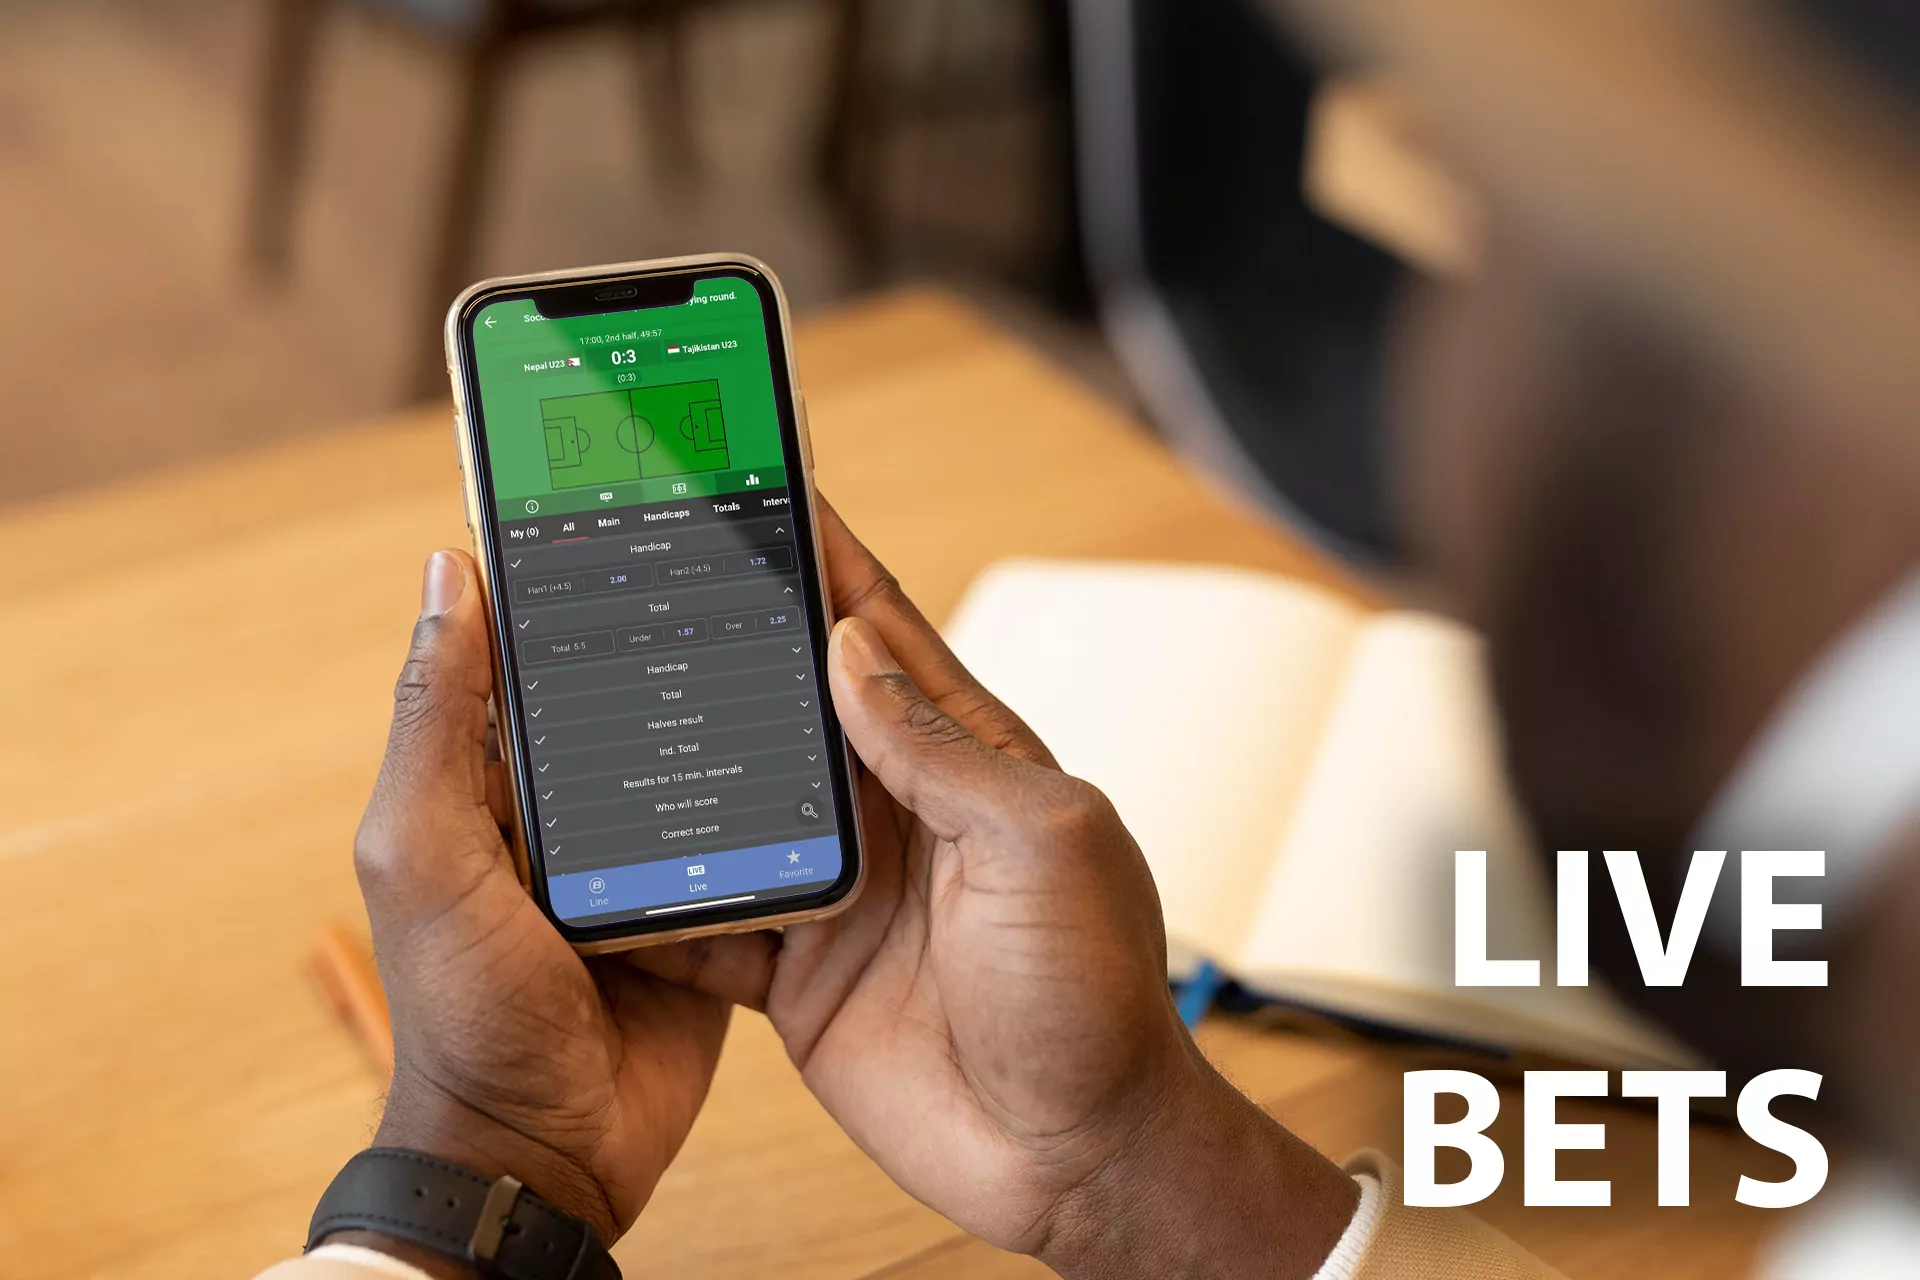 Place live bets while watching the broadcasts in the app.